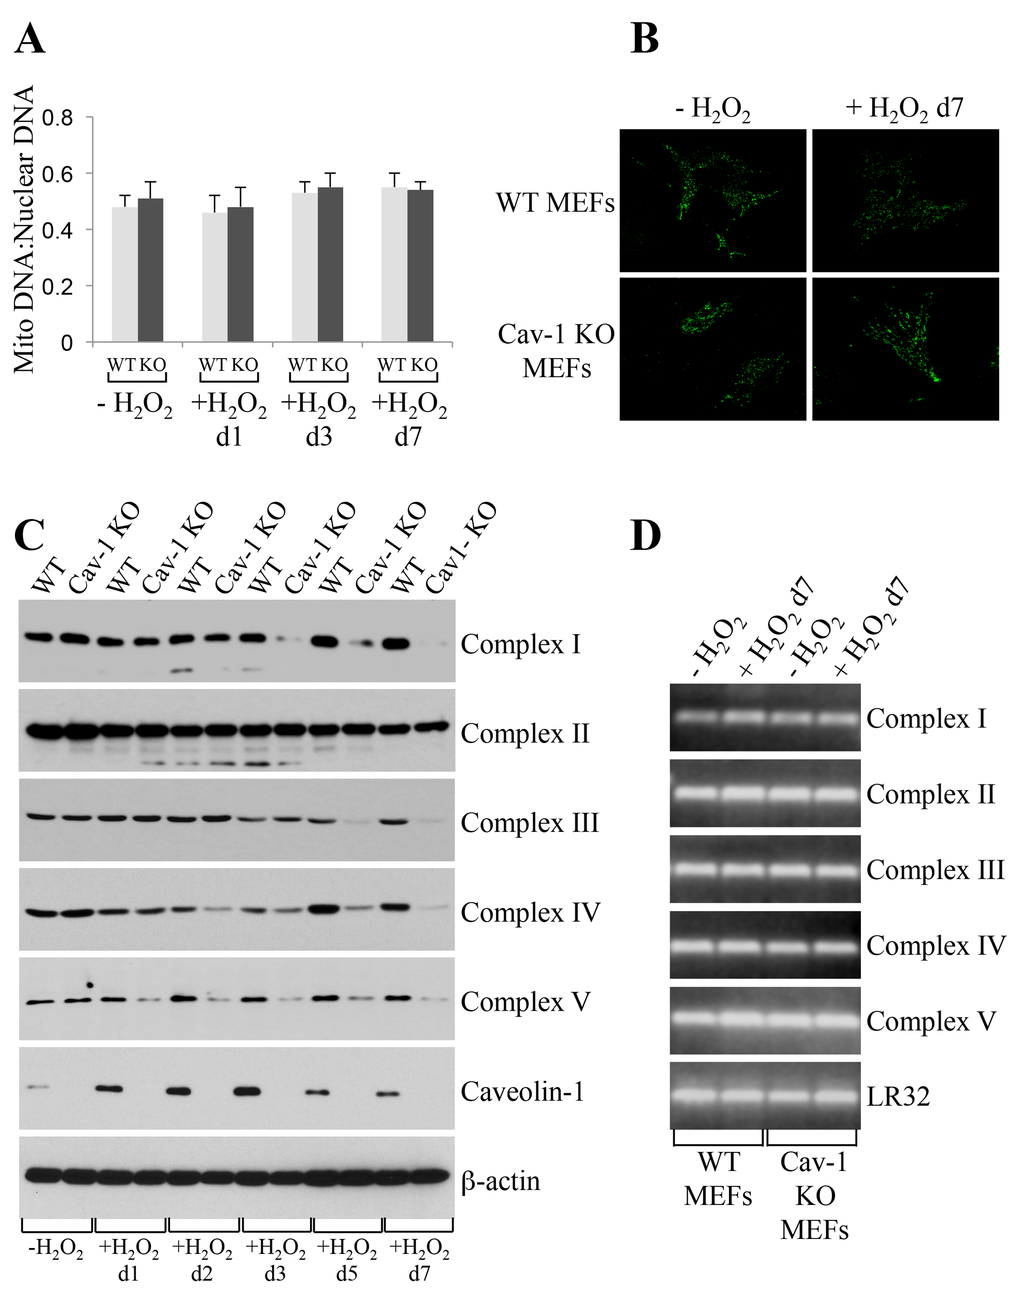 Oxidative stress promotes degradation of mitochondrial respiratory chain complexes in caveolin-1 null MEFs. Wild type and caveolin-1 null mouse embryonic fibroblasts (MEFs) were treated with sublethal doses of hydrogen peroxide (150 μM) for 2 hours. Cells were then recovered in complete medium for different periods of time. Untreated cells (-H2O2) were used as control. (A) The ratio of mitochondrial to nuclear DNA was quantified by performing RT-PCR analysis for the mitochondrial gene ND1 and the nuclear encoded gene Histone 19 using gene-specific primers. (B) Cells were incubated with Mitotracker Green FM (Thermo Fisher Scientific; Waltham, MA) at a concentration of 100 nM in DMEM. Cells were incubated at 37°C for 30 min, washed with PBS and imaged using a Zeiss Confocal Microscope (LSM 5 Pascal; Carl Zeiss, Jena, Germany). (C) The expression level of complex I, complex II, complex III, complex IV, complex V and caveolin-1 was determined by immunoblotting analysis using specific antibody probes. Immunoblotting with anti-β-actin IgGs was performed as internal control. (D) RT-PCR analysis for complex I, complex II, complex III, complex IV and complex V was performed using gene-specific primers. RT-PCR analysis using primers for LR32 was performed as internal control.